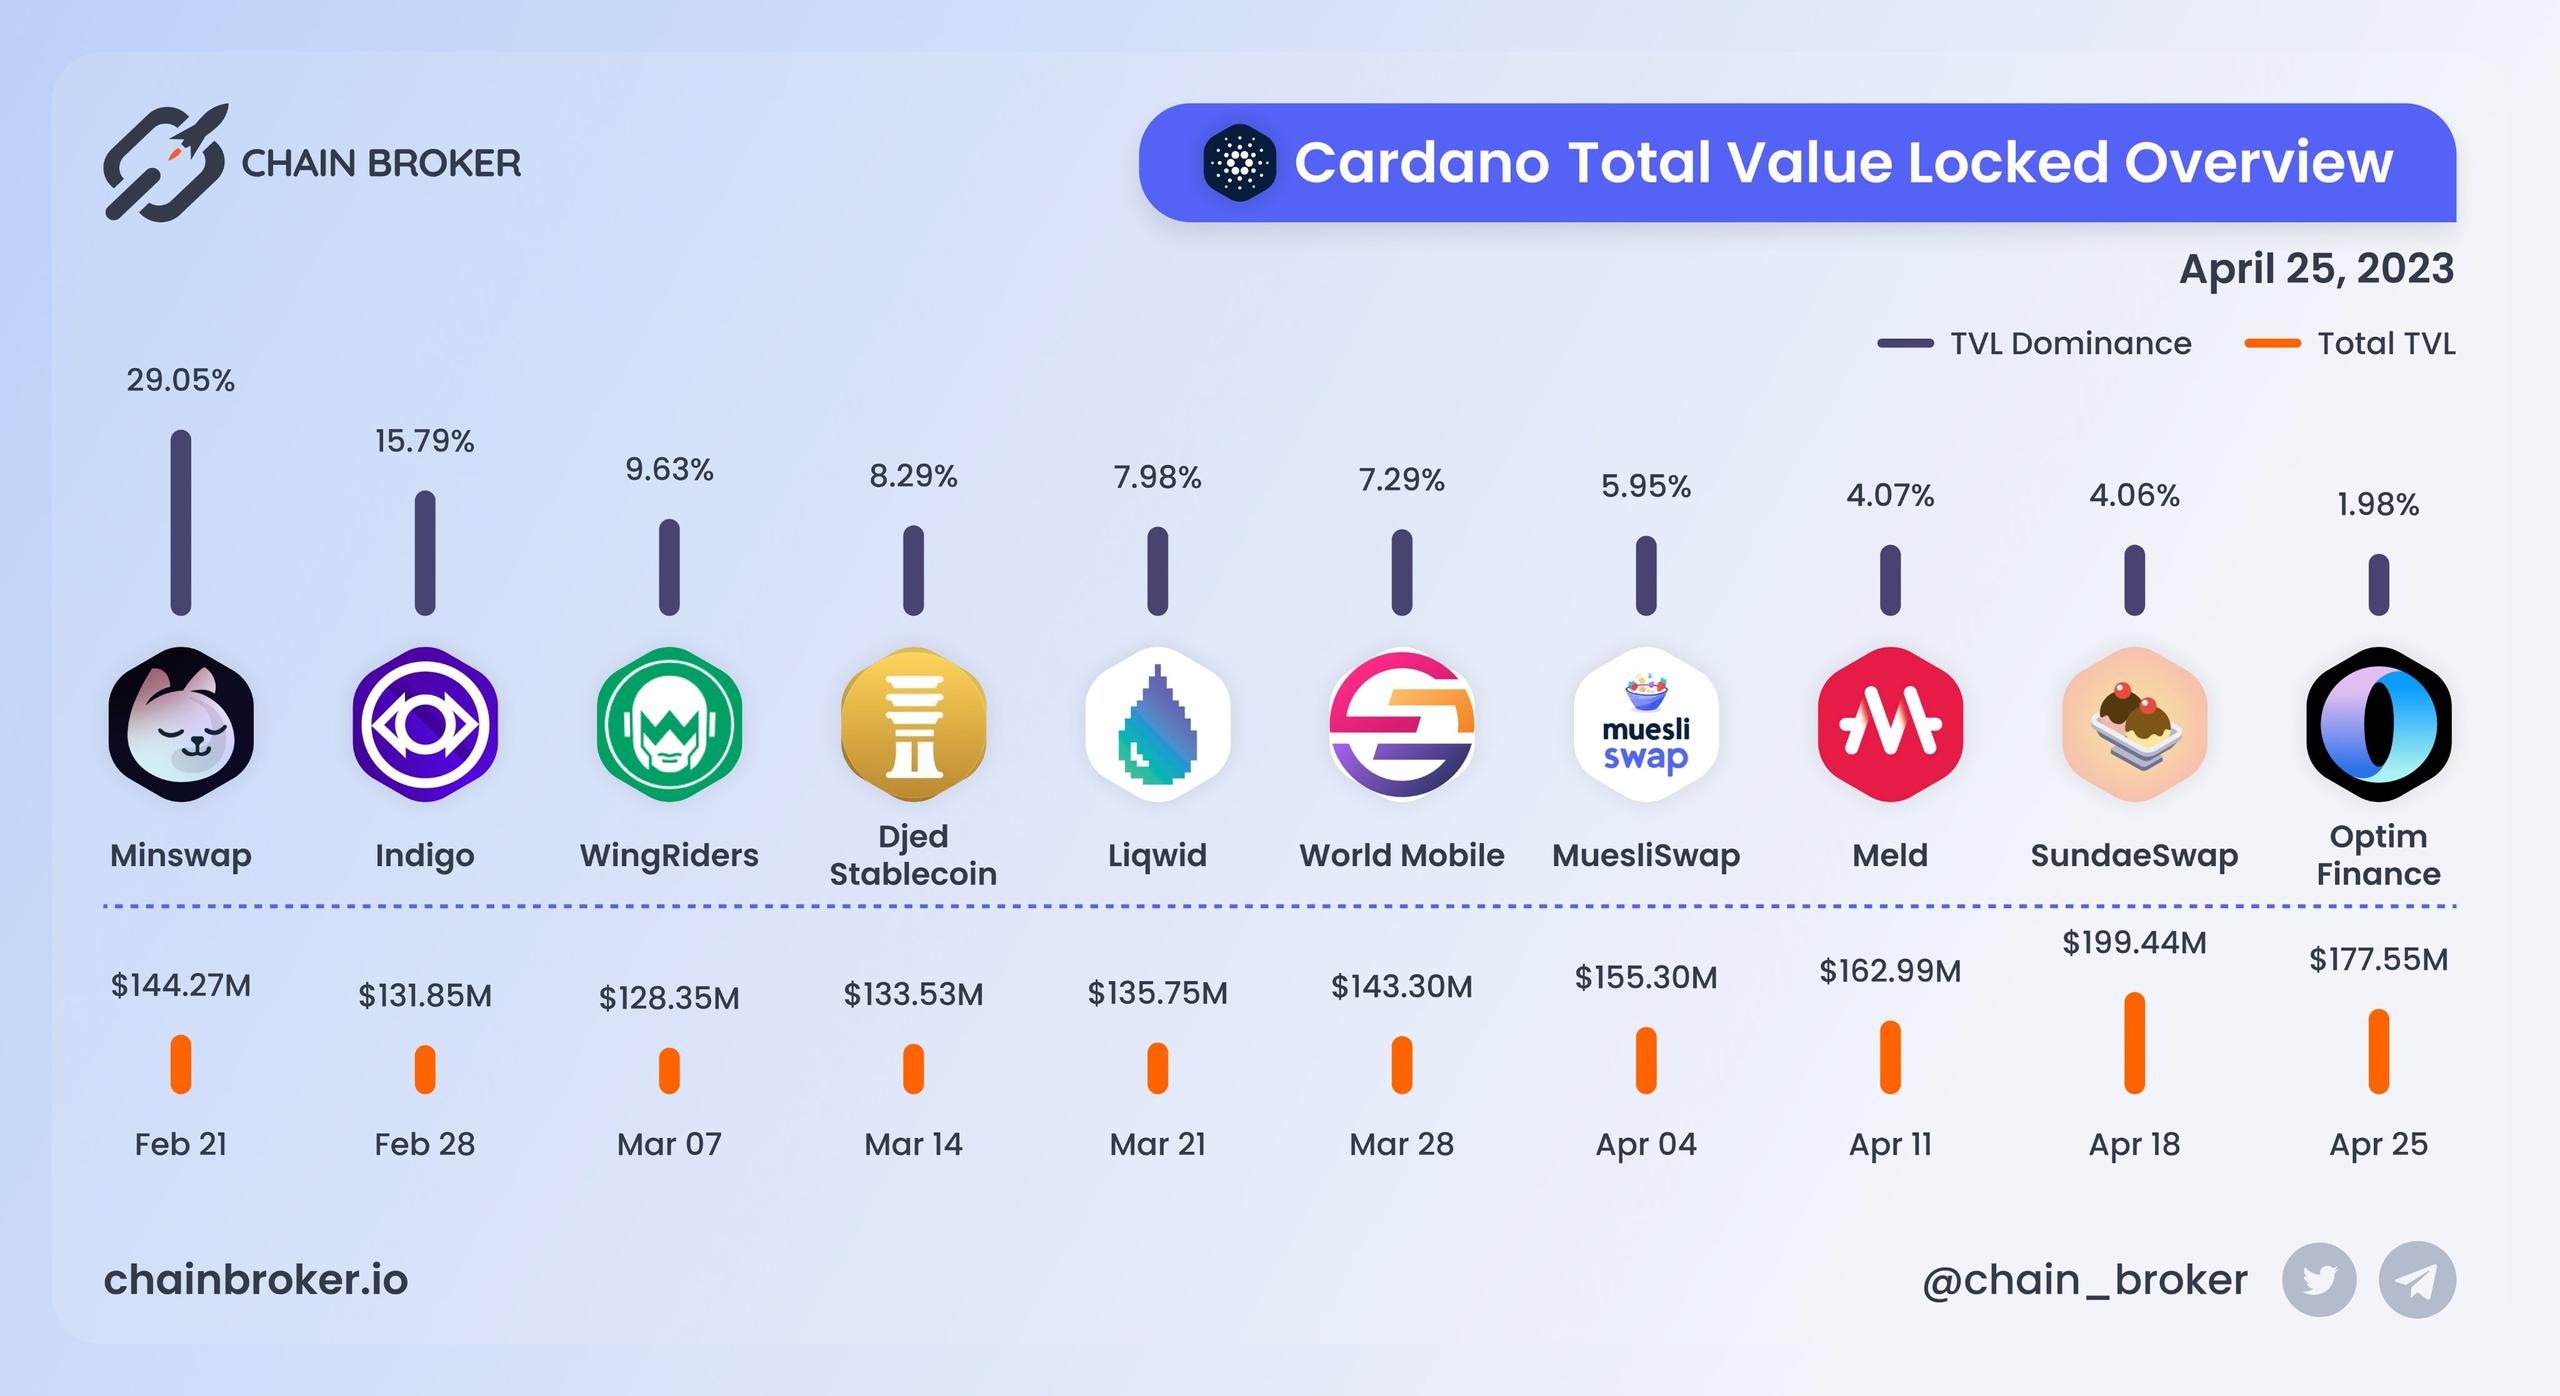 Cardano total value locked overview